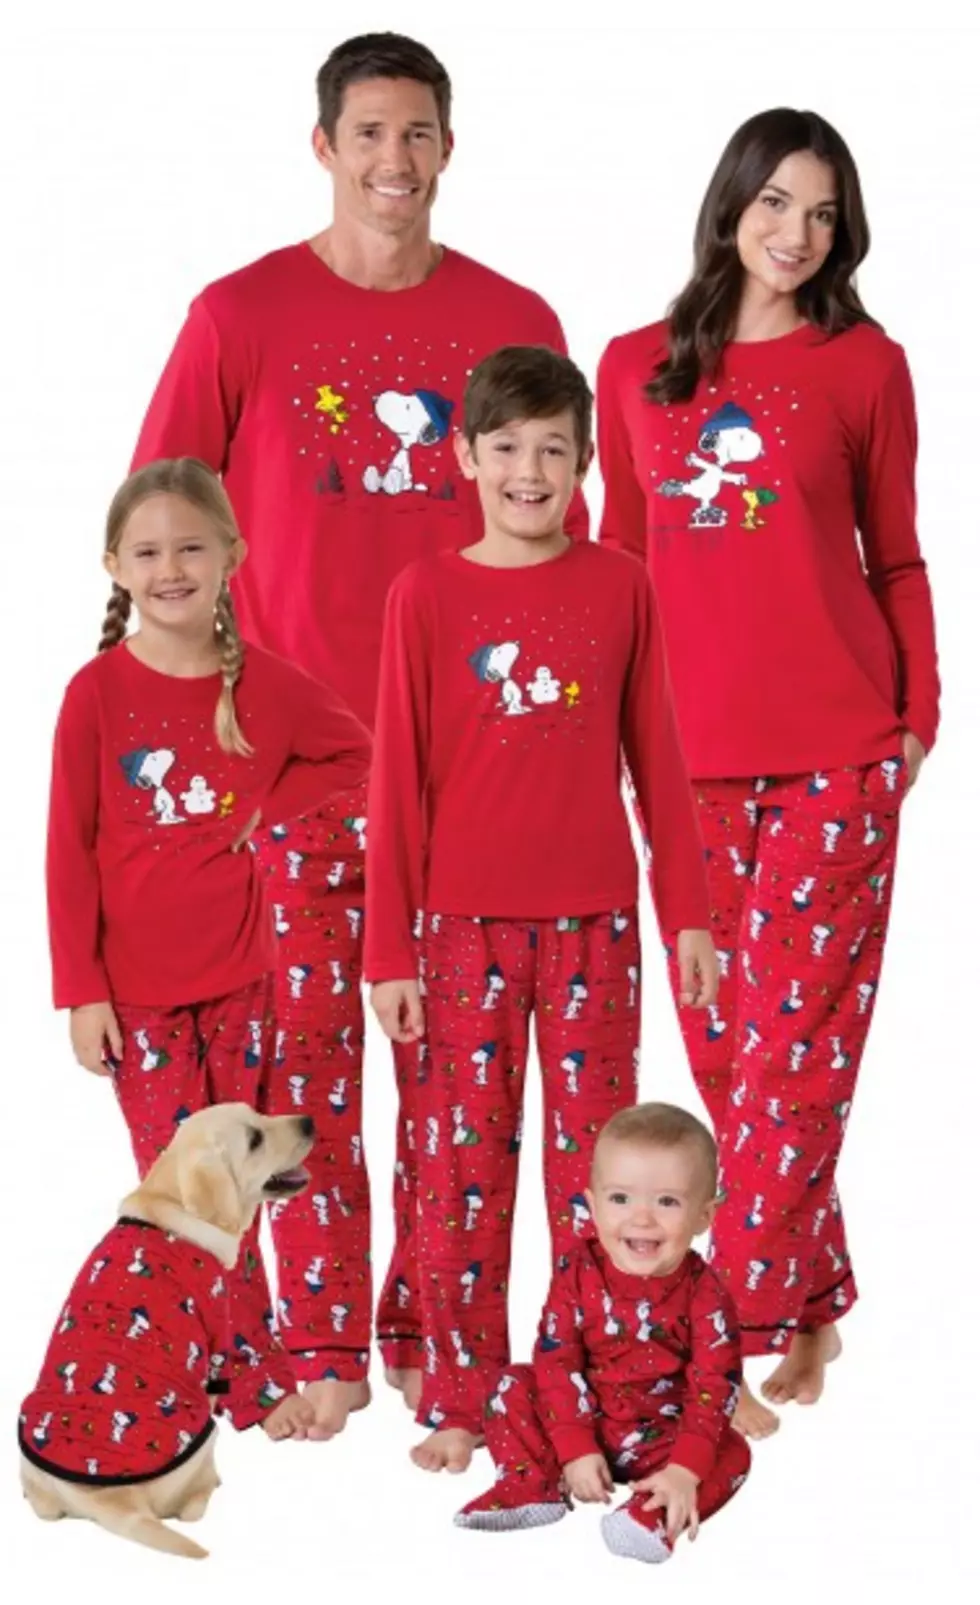 Now You Can Match Pajamas With Your Dog